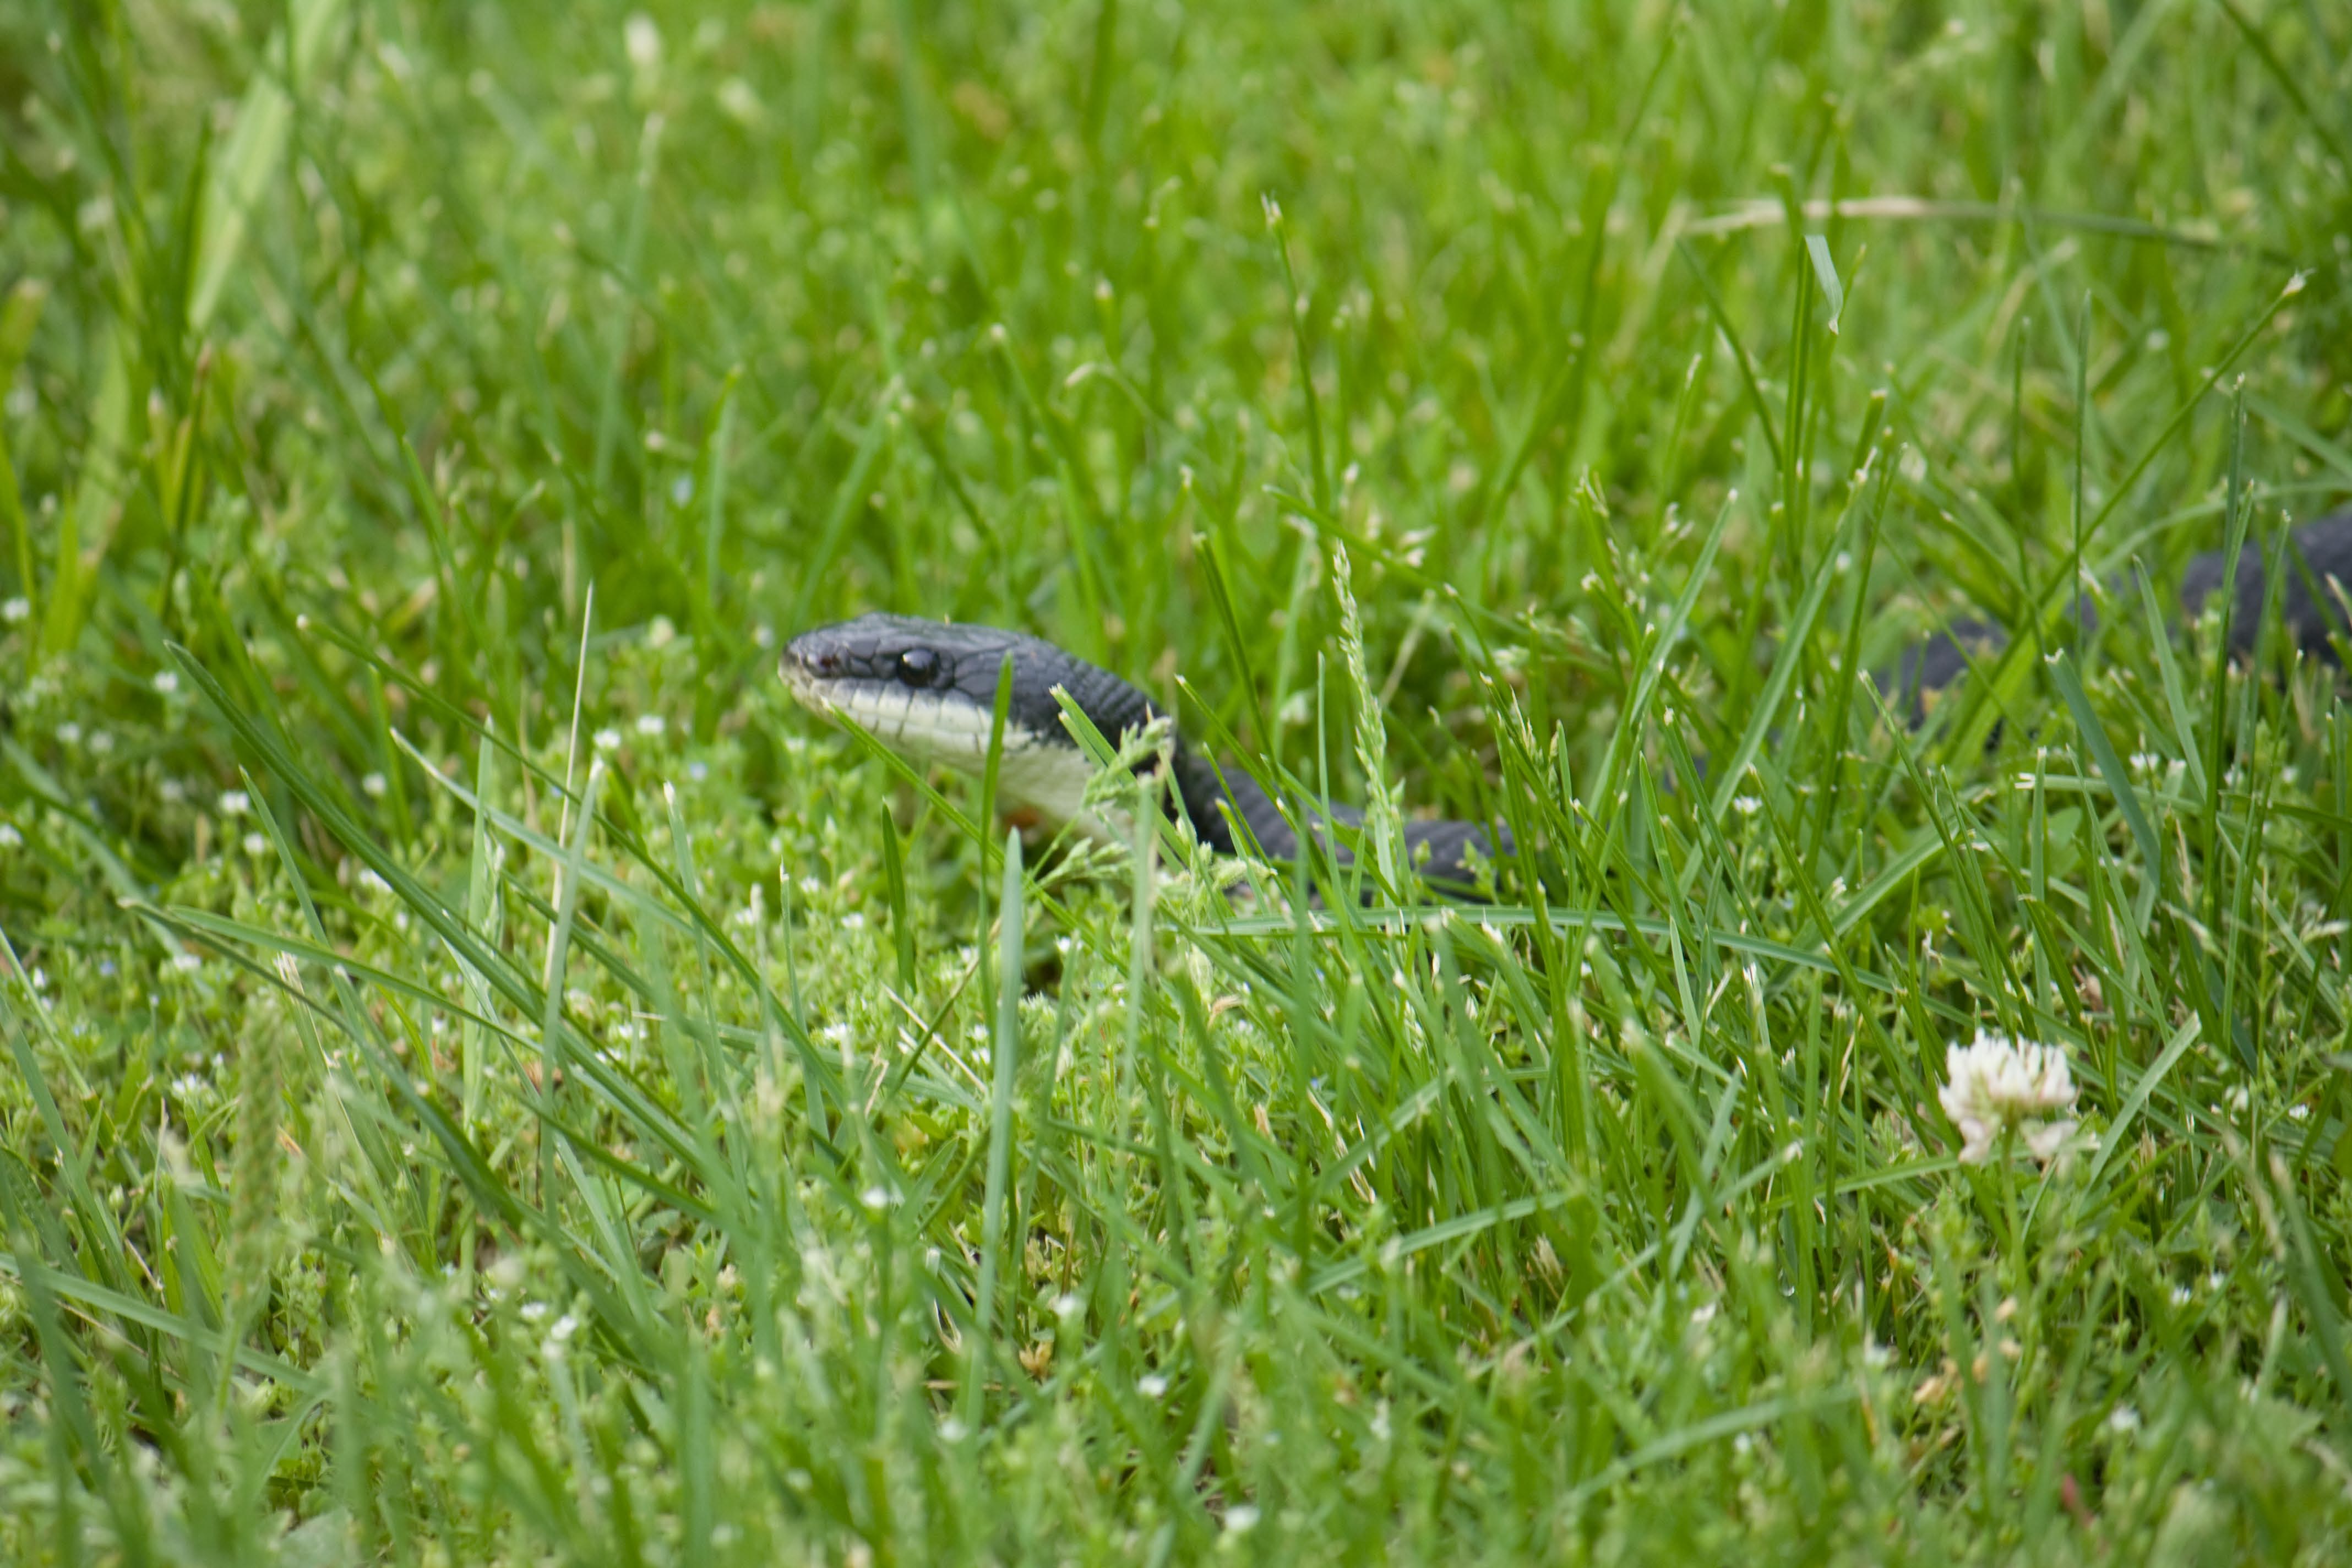 a black snake peeping out of the grass